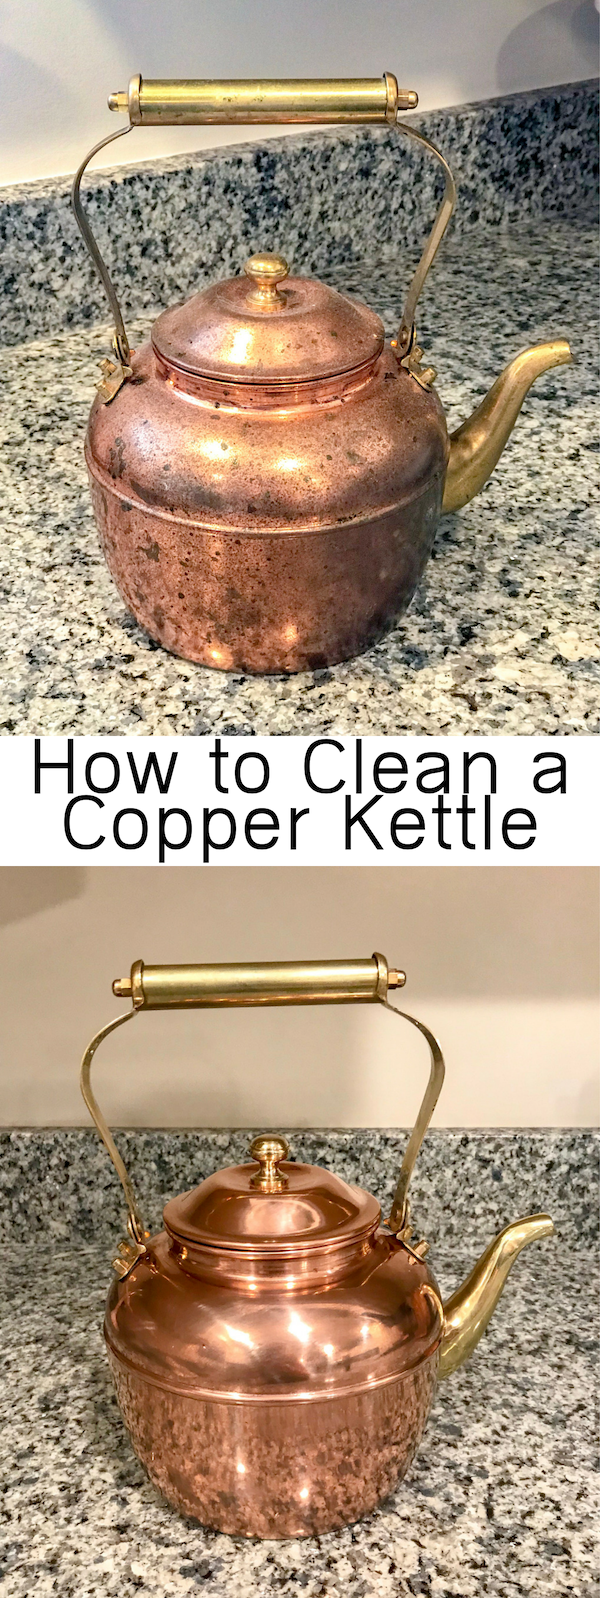 How to Clean a Copper Kettle